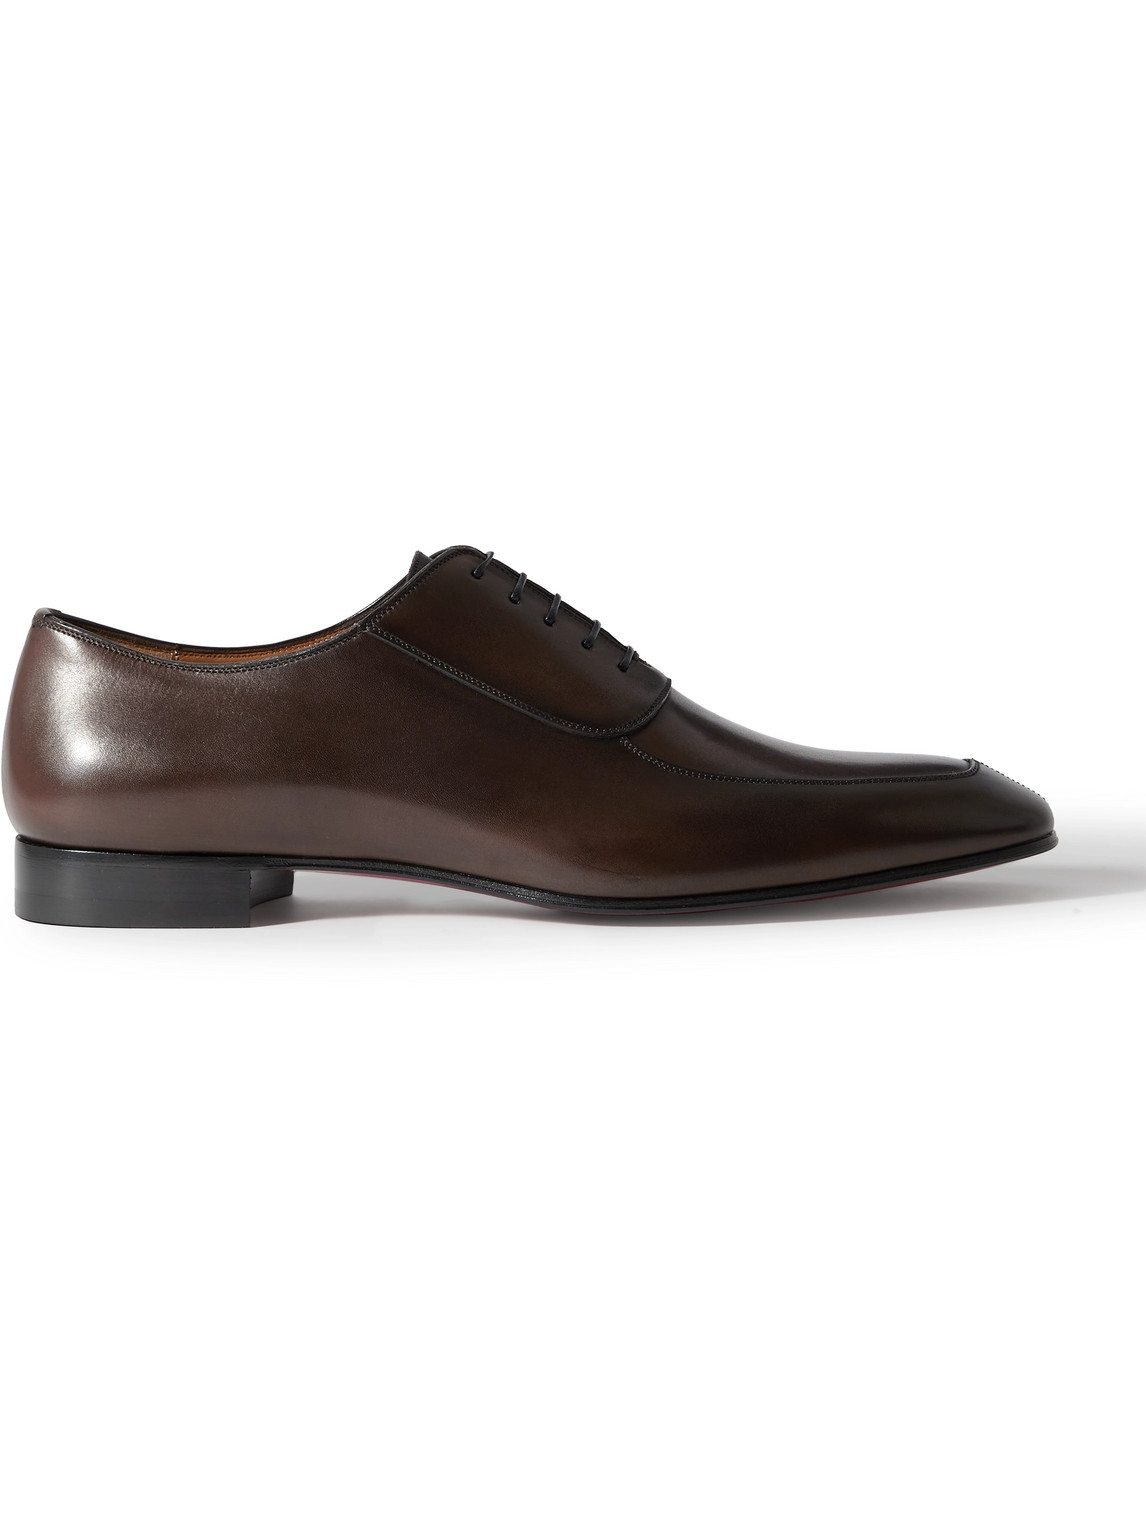 Christian Louboutin Lafitte Leather Oxford Shoes In Brown